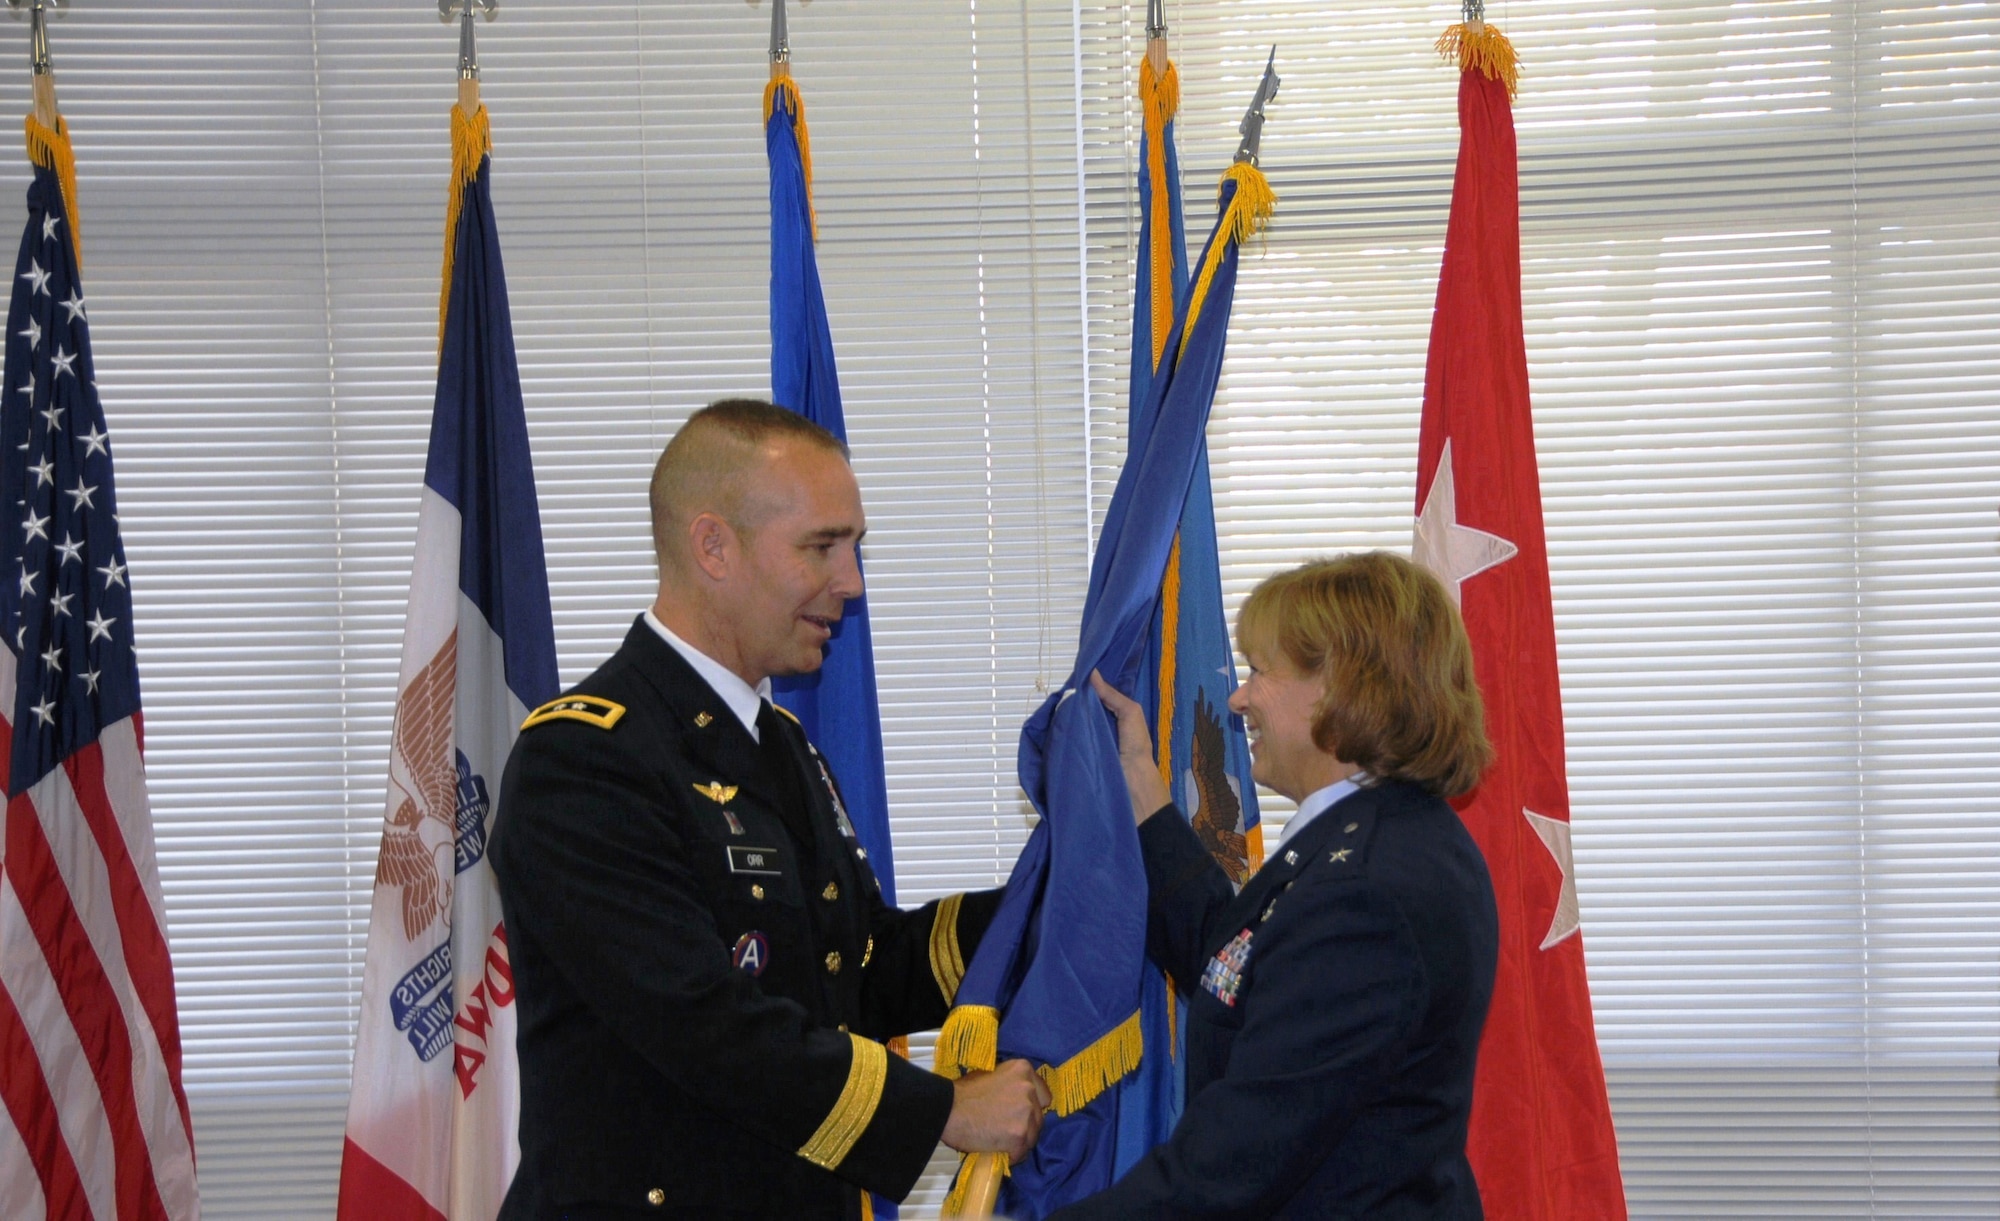 Maj. Gen. Tim Orr (left) Adjutant General of the Iowa National Guard, presents a General Officer flag to Brig. Gen. Jennifer Walter (right) at her promotion ceremony to Brigadier General on Oct. 14, 2012 at the 132nd Fighter Wing (132FW), Iowa Air National Guard, Des Moines, Iowa. Brig. Gen. Walter is the first female General Officer in the history of the Iowa Air National Guard. (US Air Force photo/Master Sgt Robert P. Shepherd)(Released)